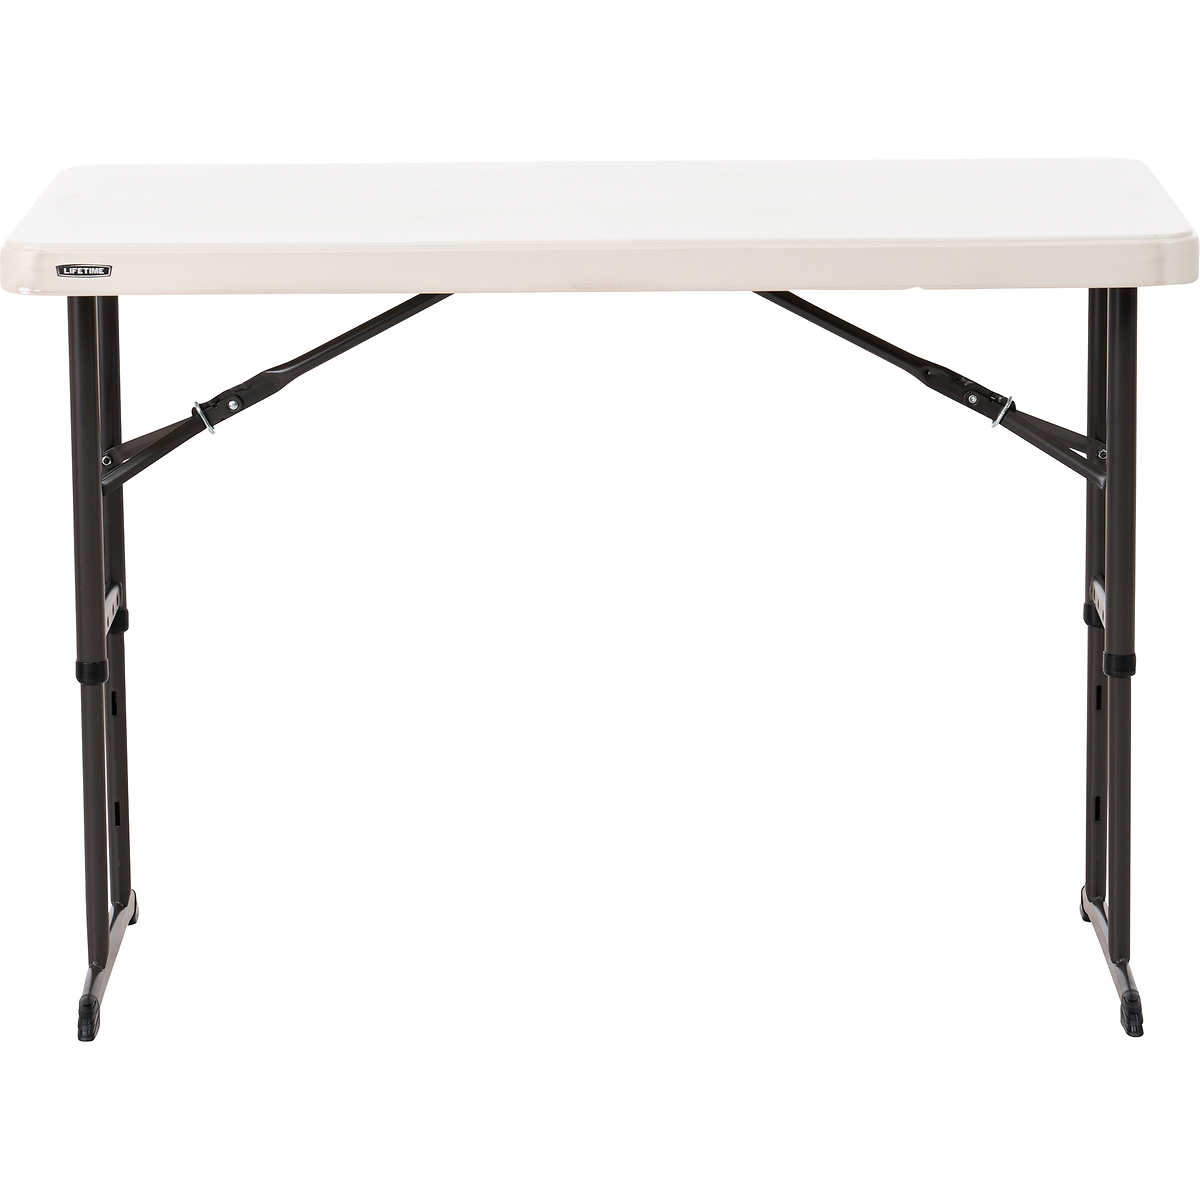 Lifetime Adjustable Height Table 48 W, 48 Inch Round Folding Table Costco